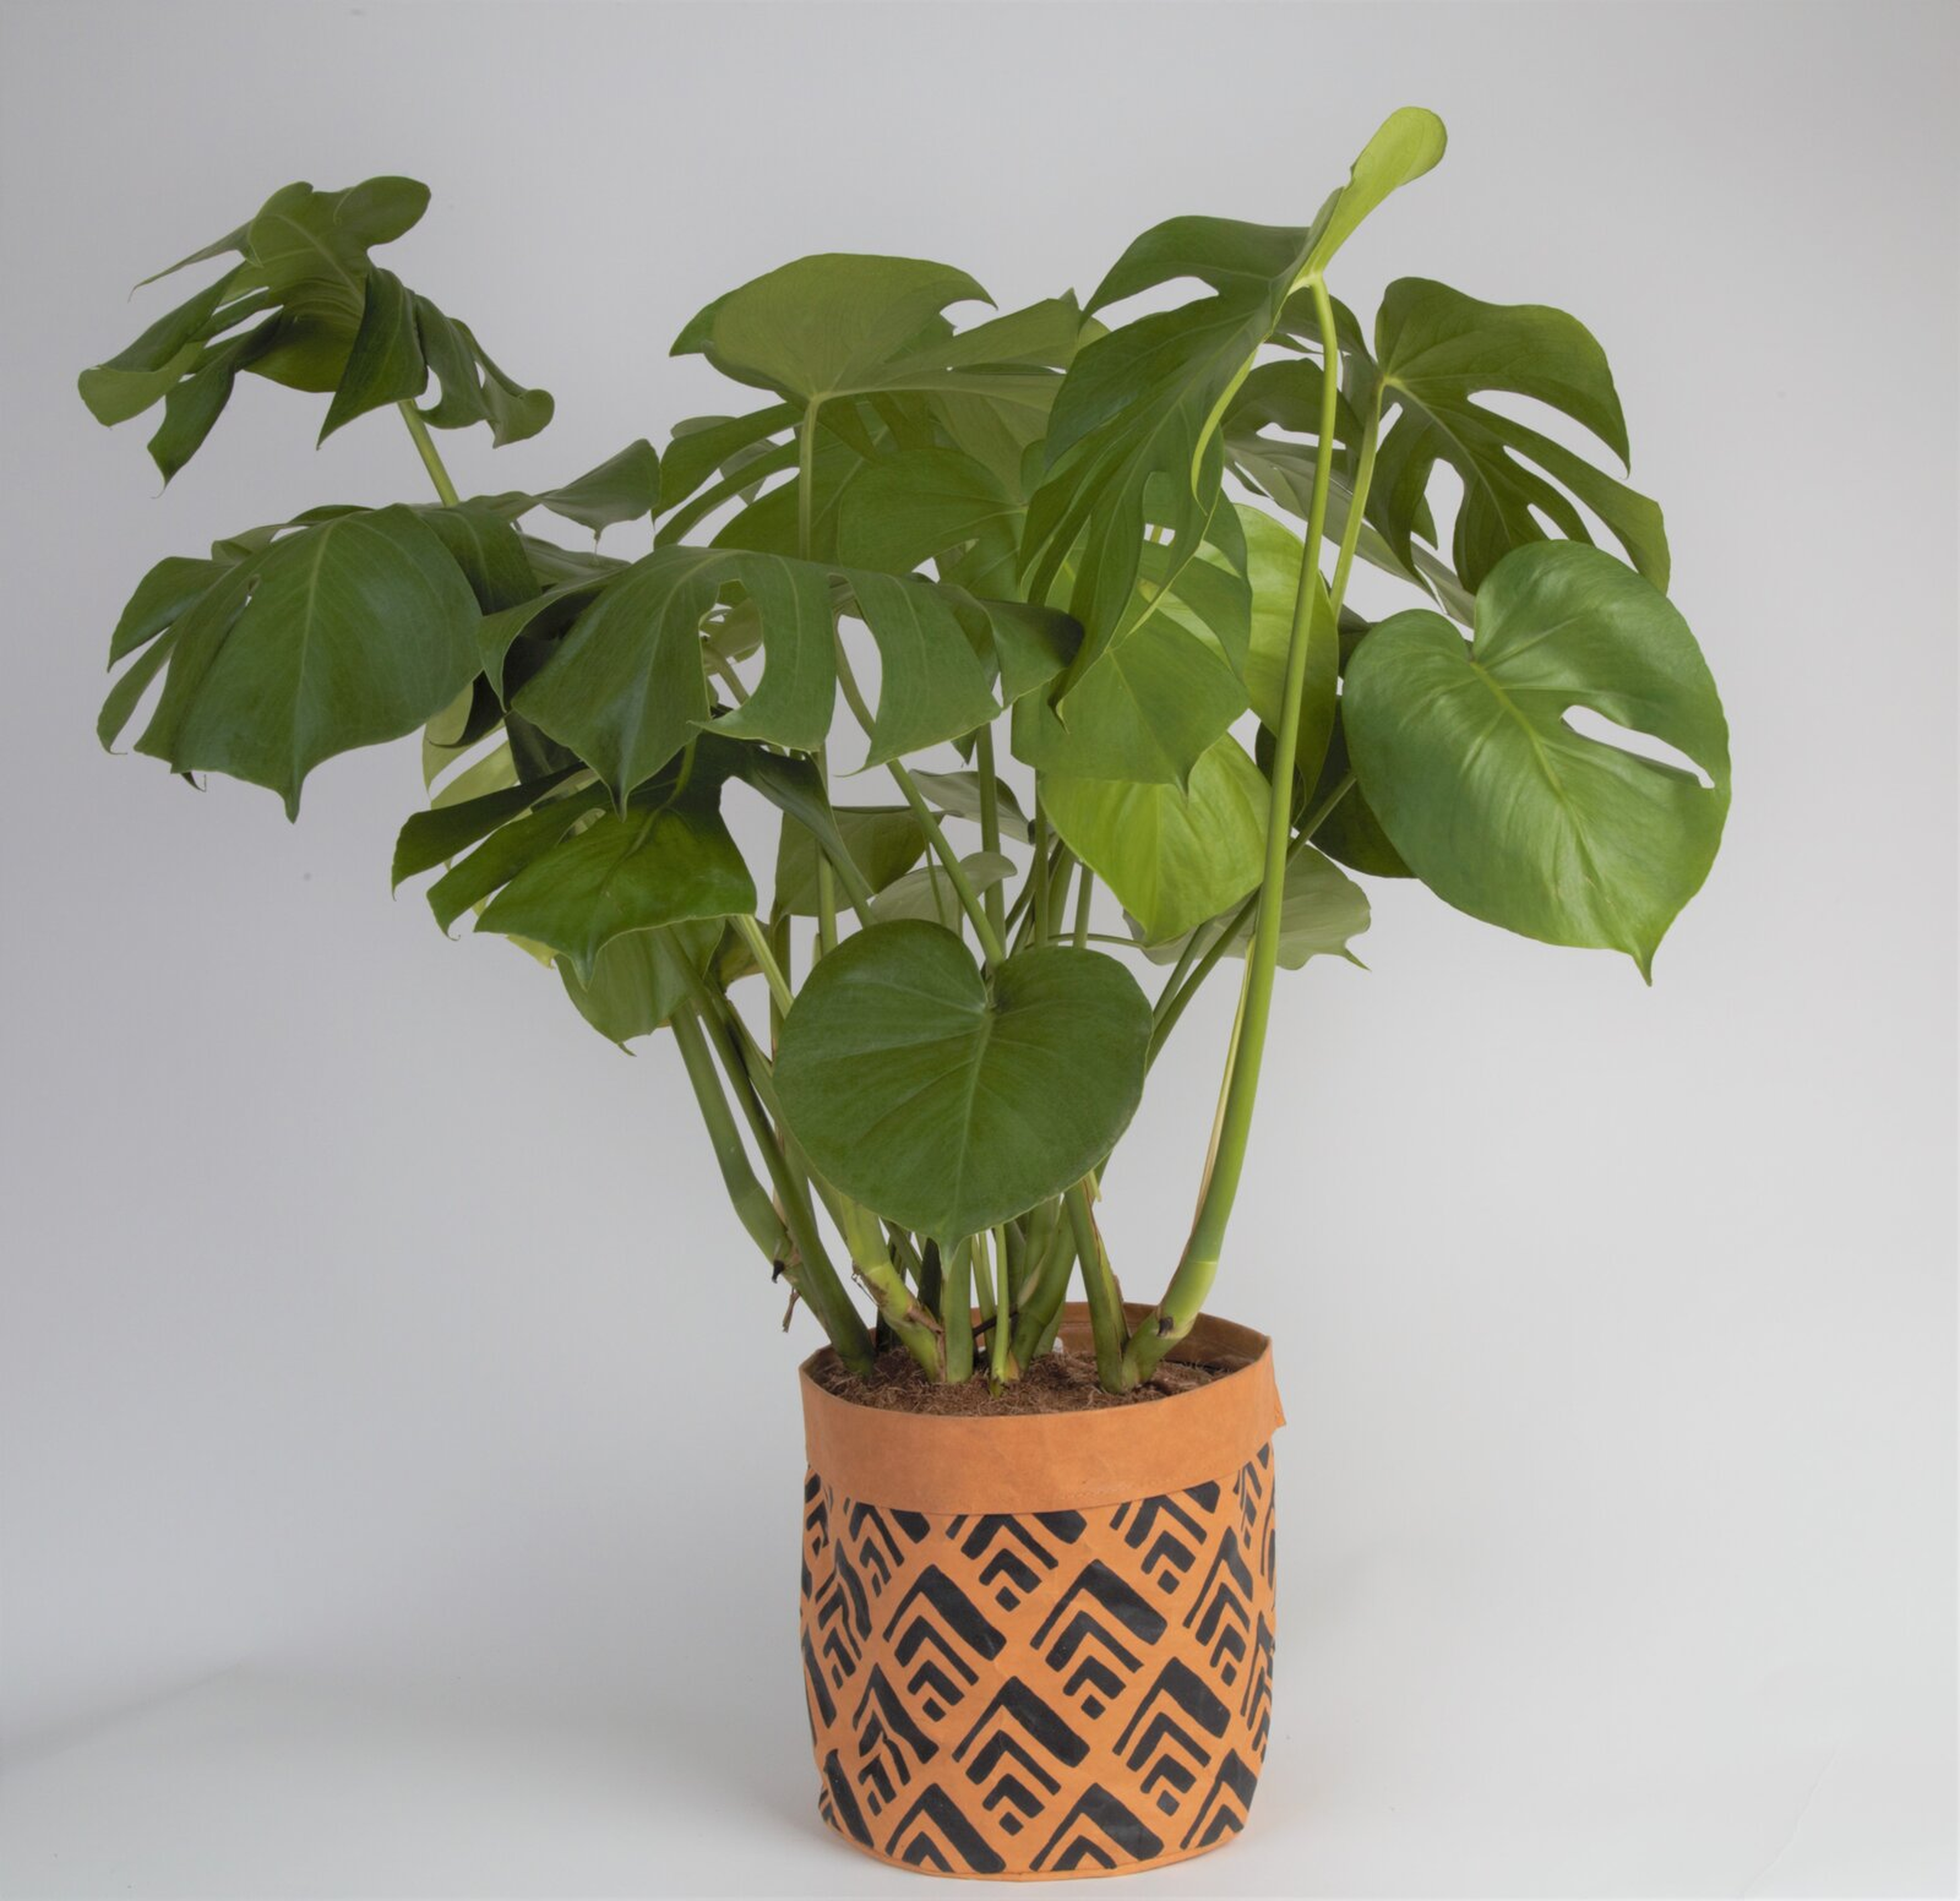 Costa Farms 30'' Philodendron Plant in a Wicker / Rattan Basket with Air Purifying Qualities for Outdoor Use - Wayfair